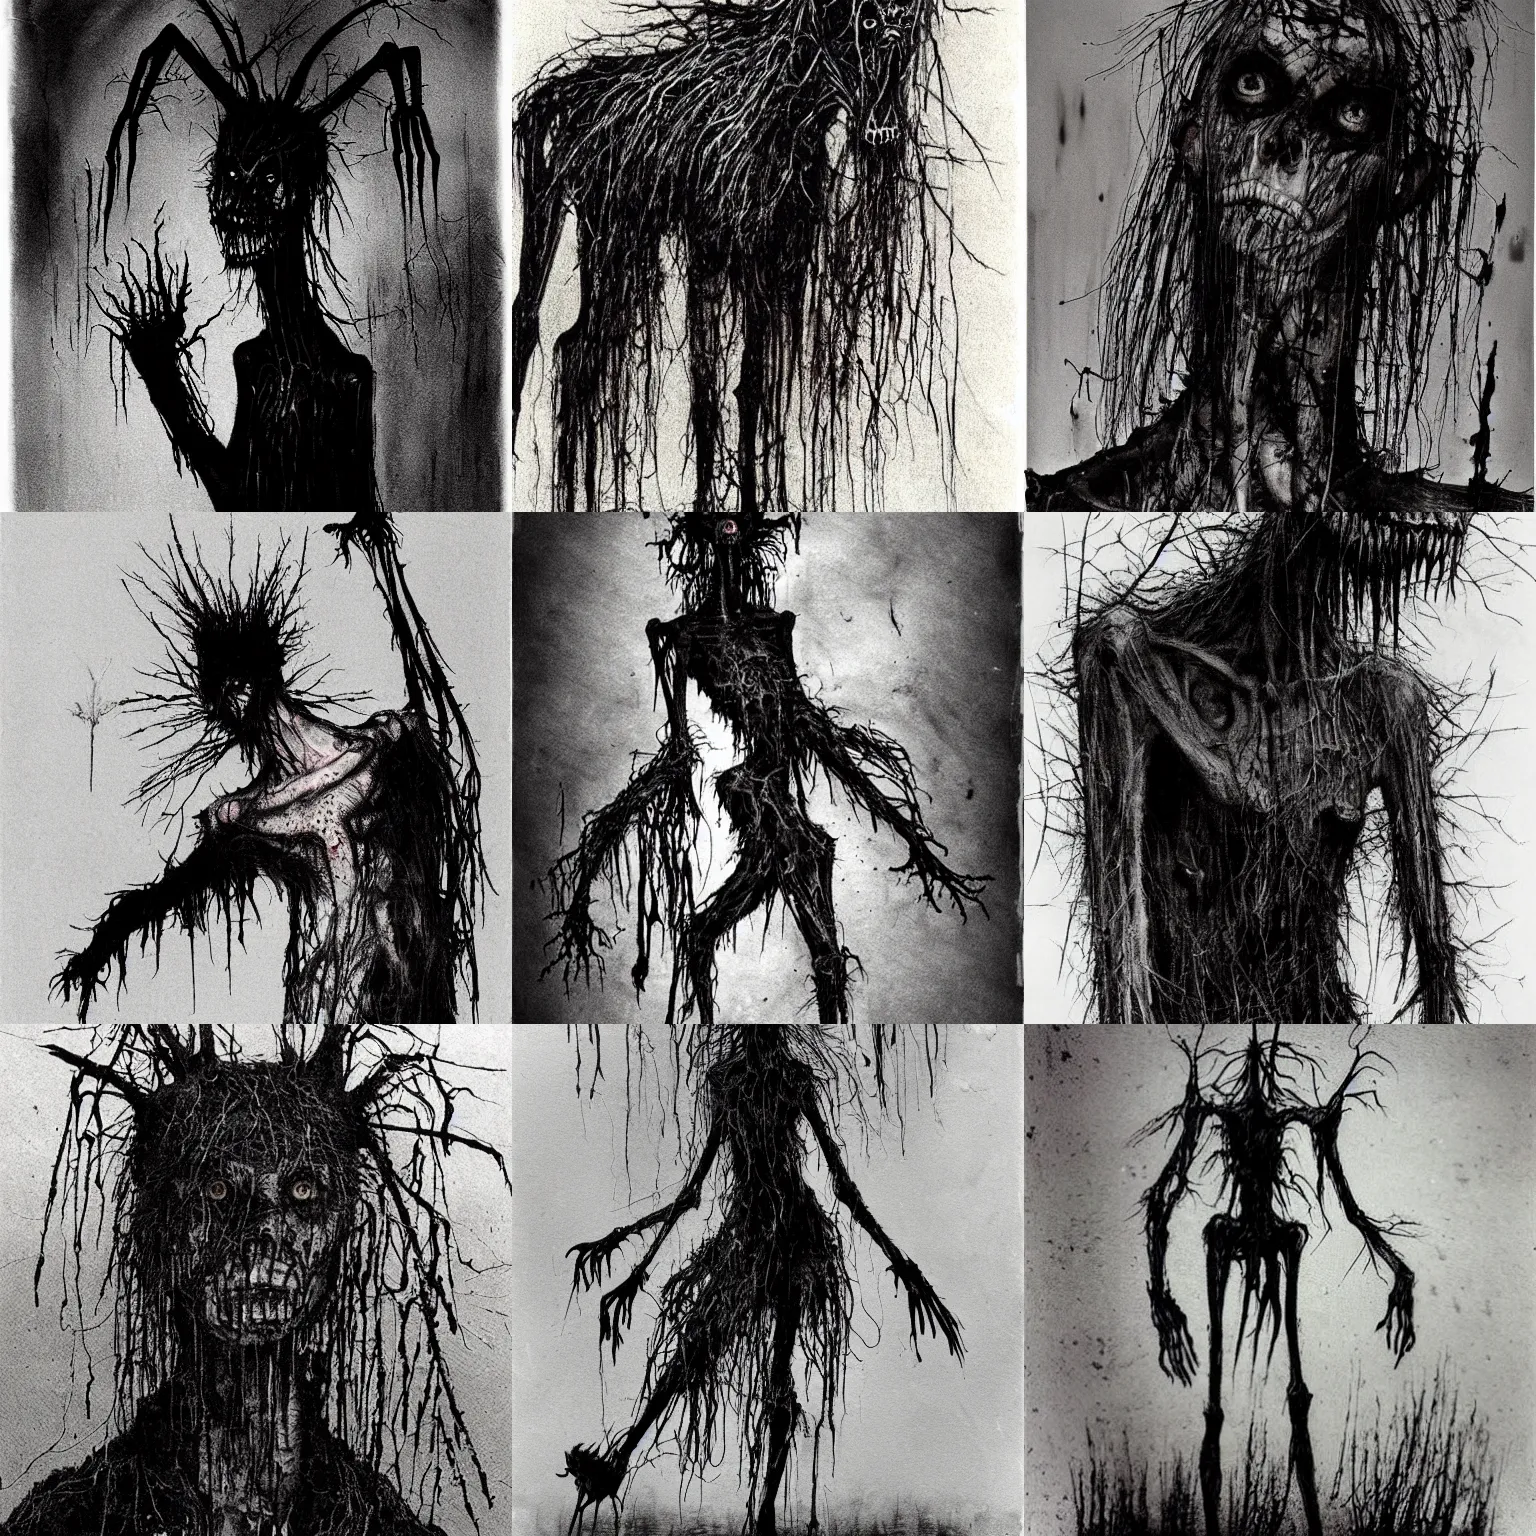 Prompt: a tall, thin, skeletal figure with long, sharp claws and a hideous, rotting face. It is dressed in tattered black clothes and moves silently and swiftly, appearing out of the darkness to terrify its victims. by Stephen Gammell